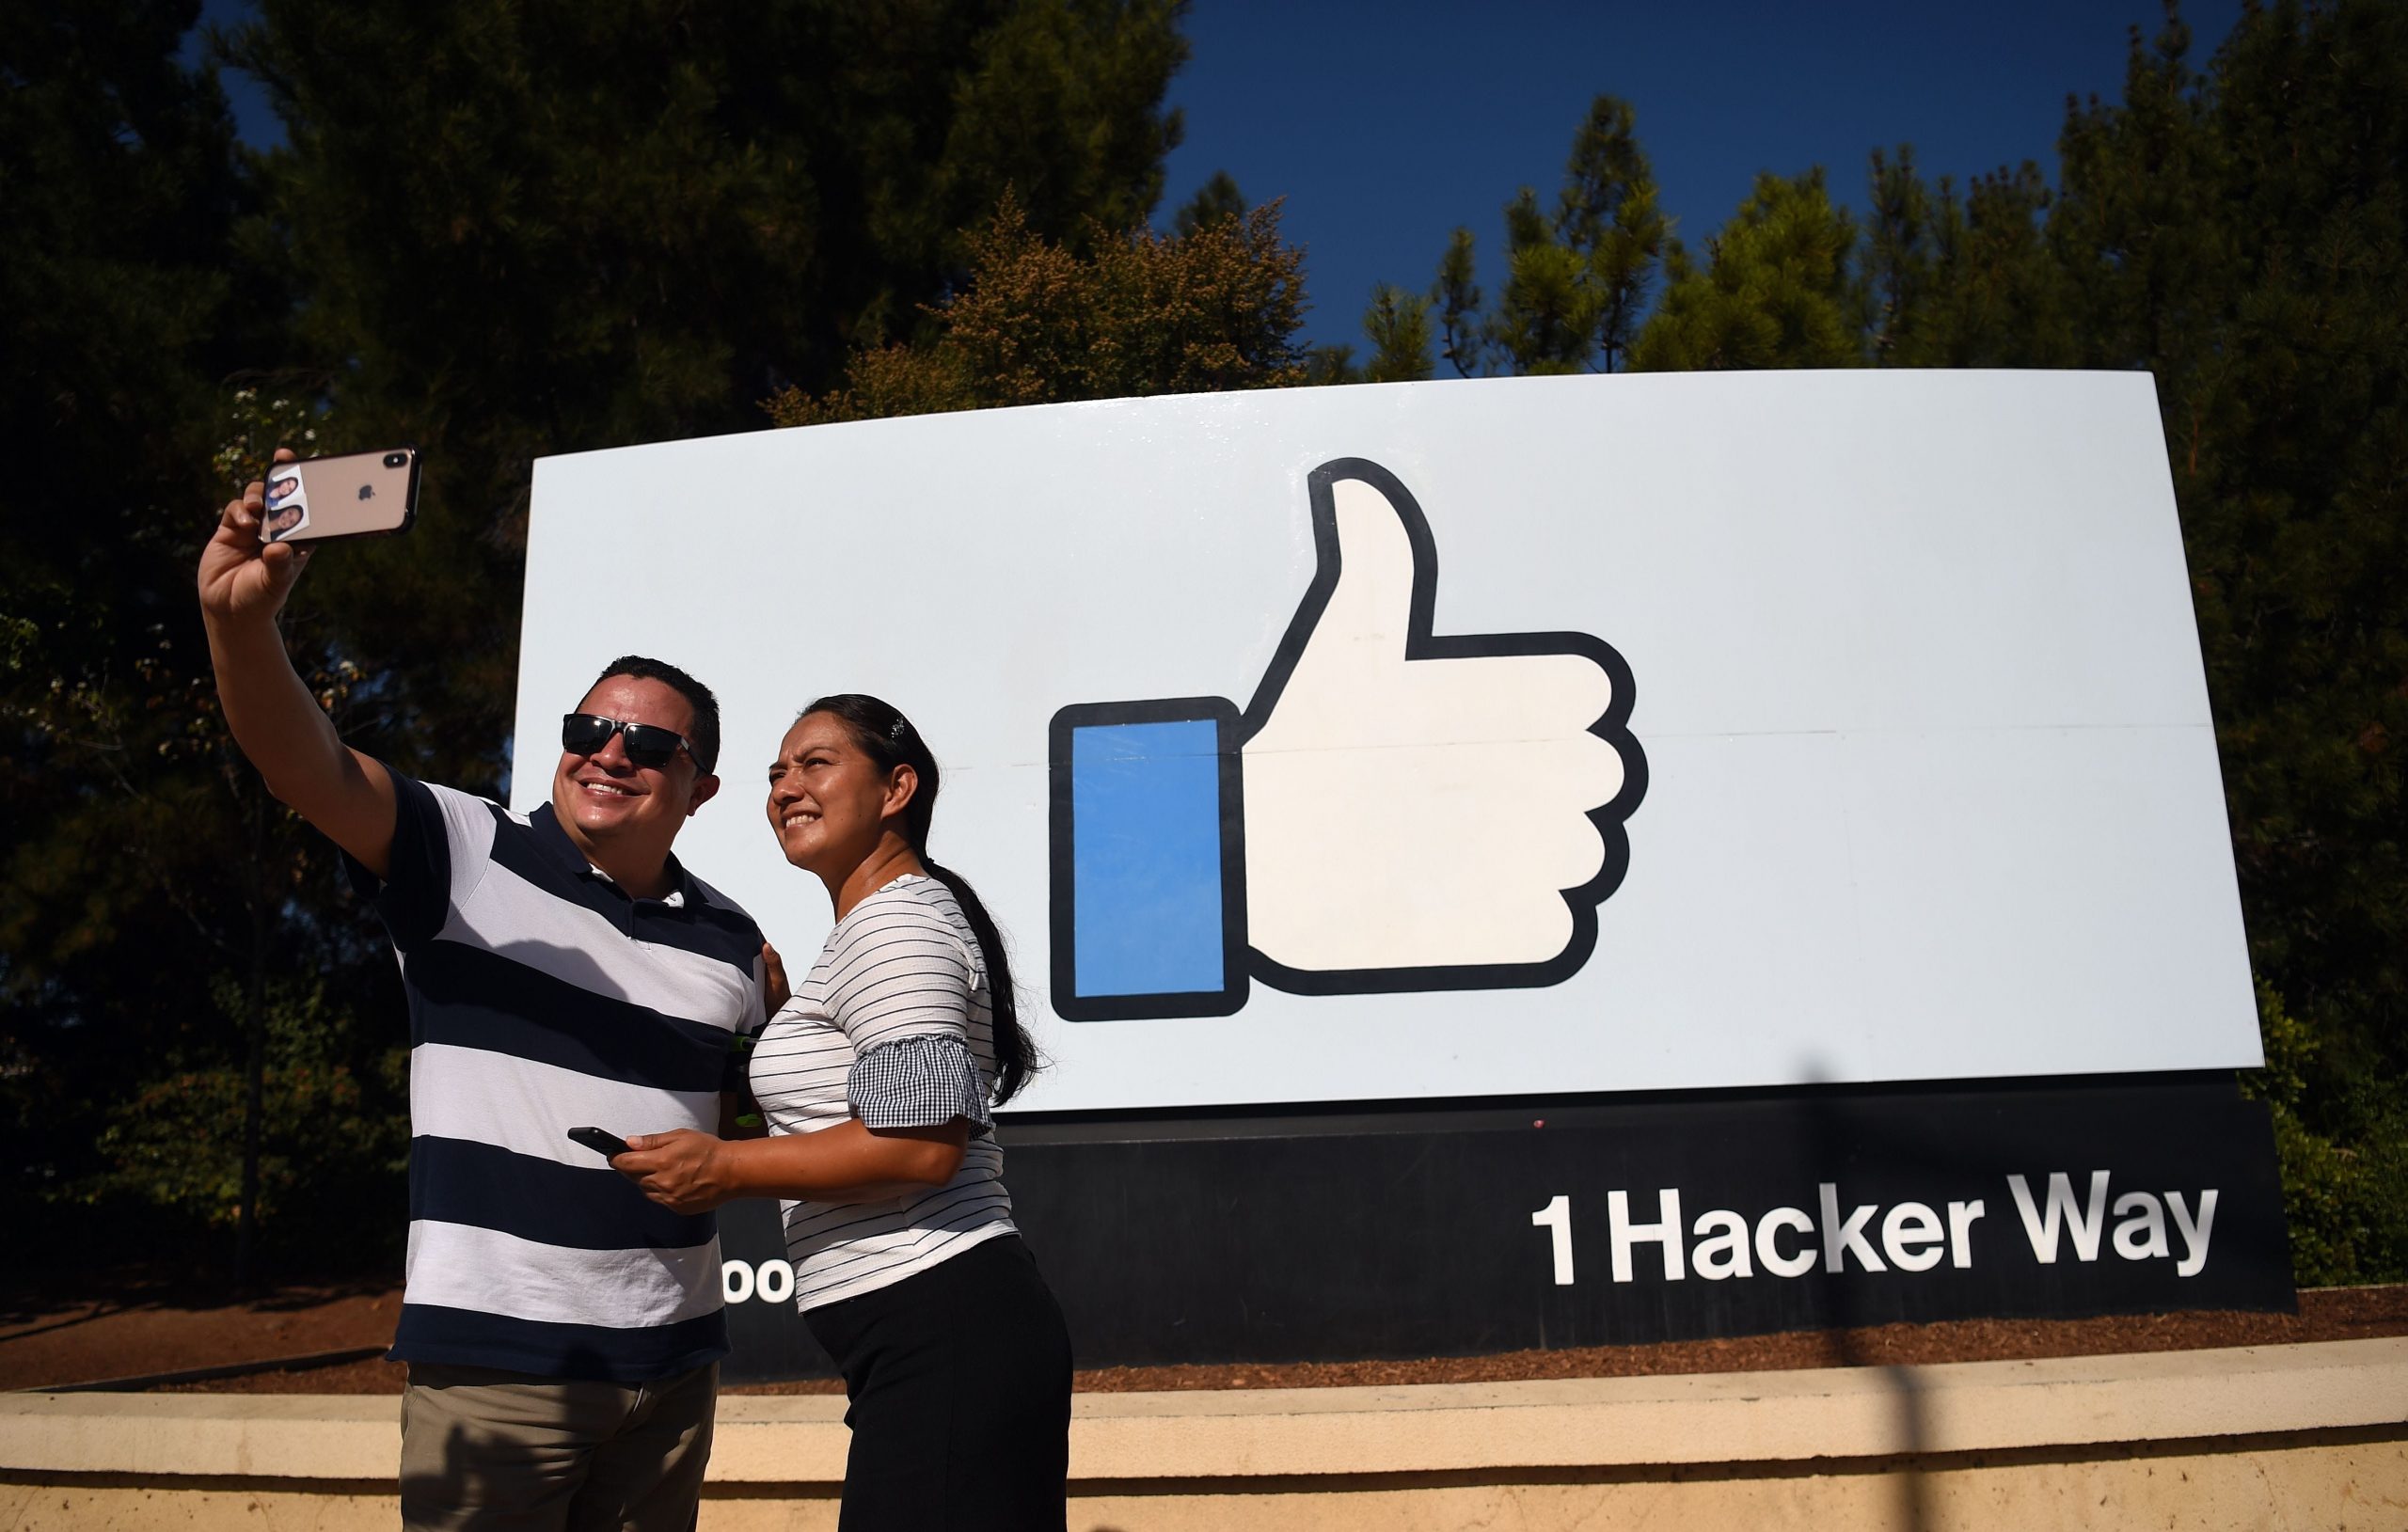 Two people taking a selfie in front of the Facebook "thumbs up" sign at the company's heaequarters